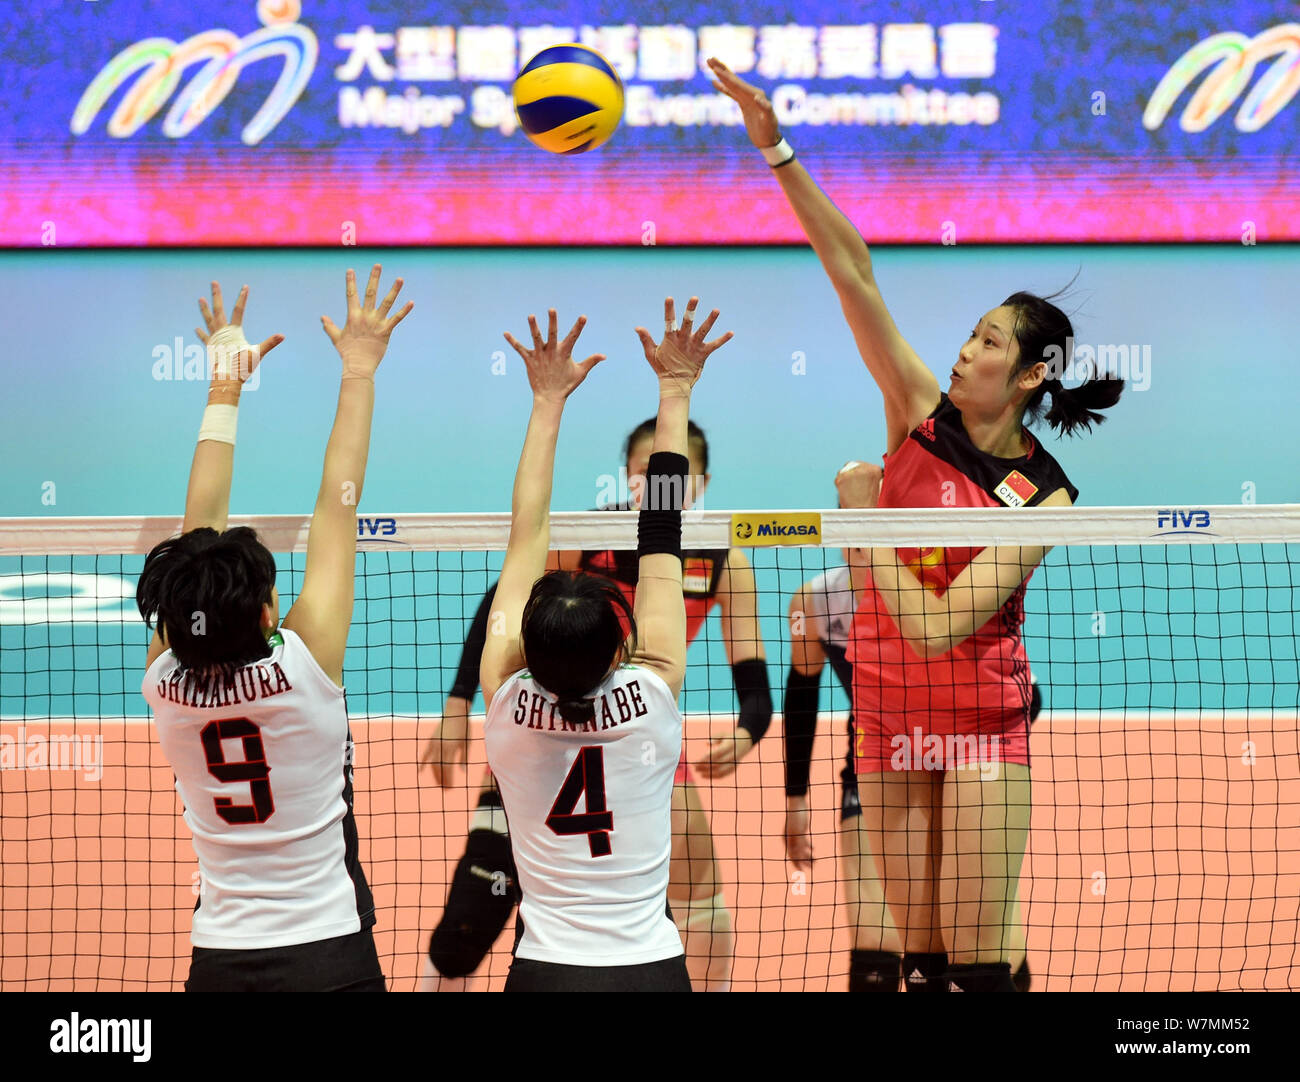 Zhu Ting, right, of China spikes against Haruyo Shimamura, and Risa Shinnabe of Japan during the Pool G1-Group 1 match of the FIVB Volleyball World Gr Stock Photo